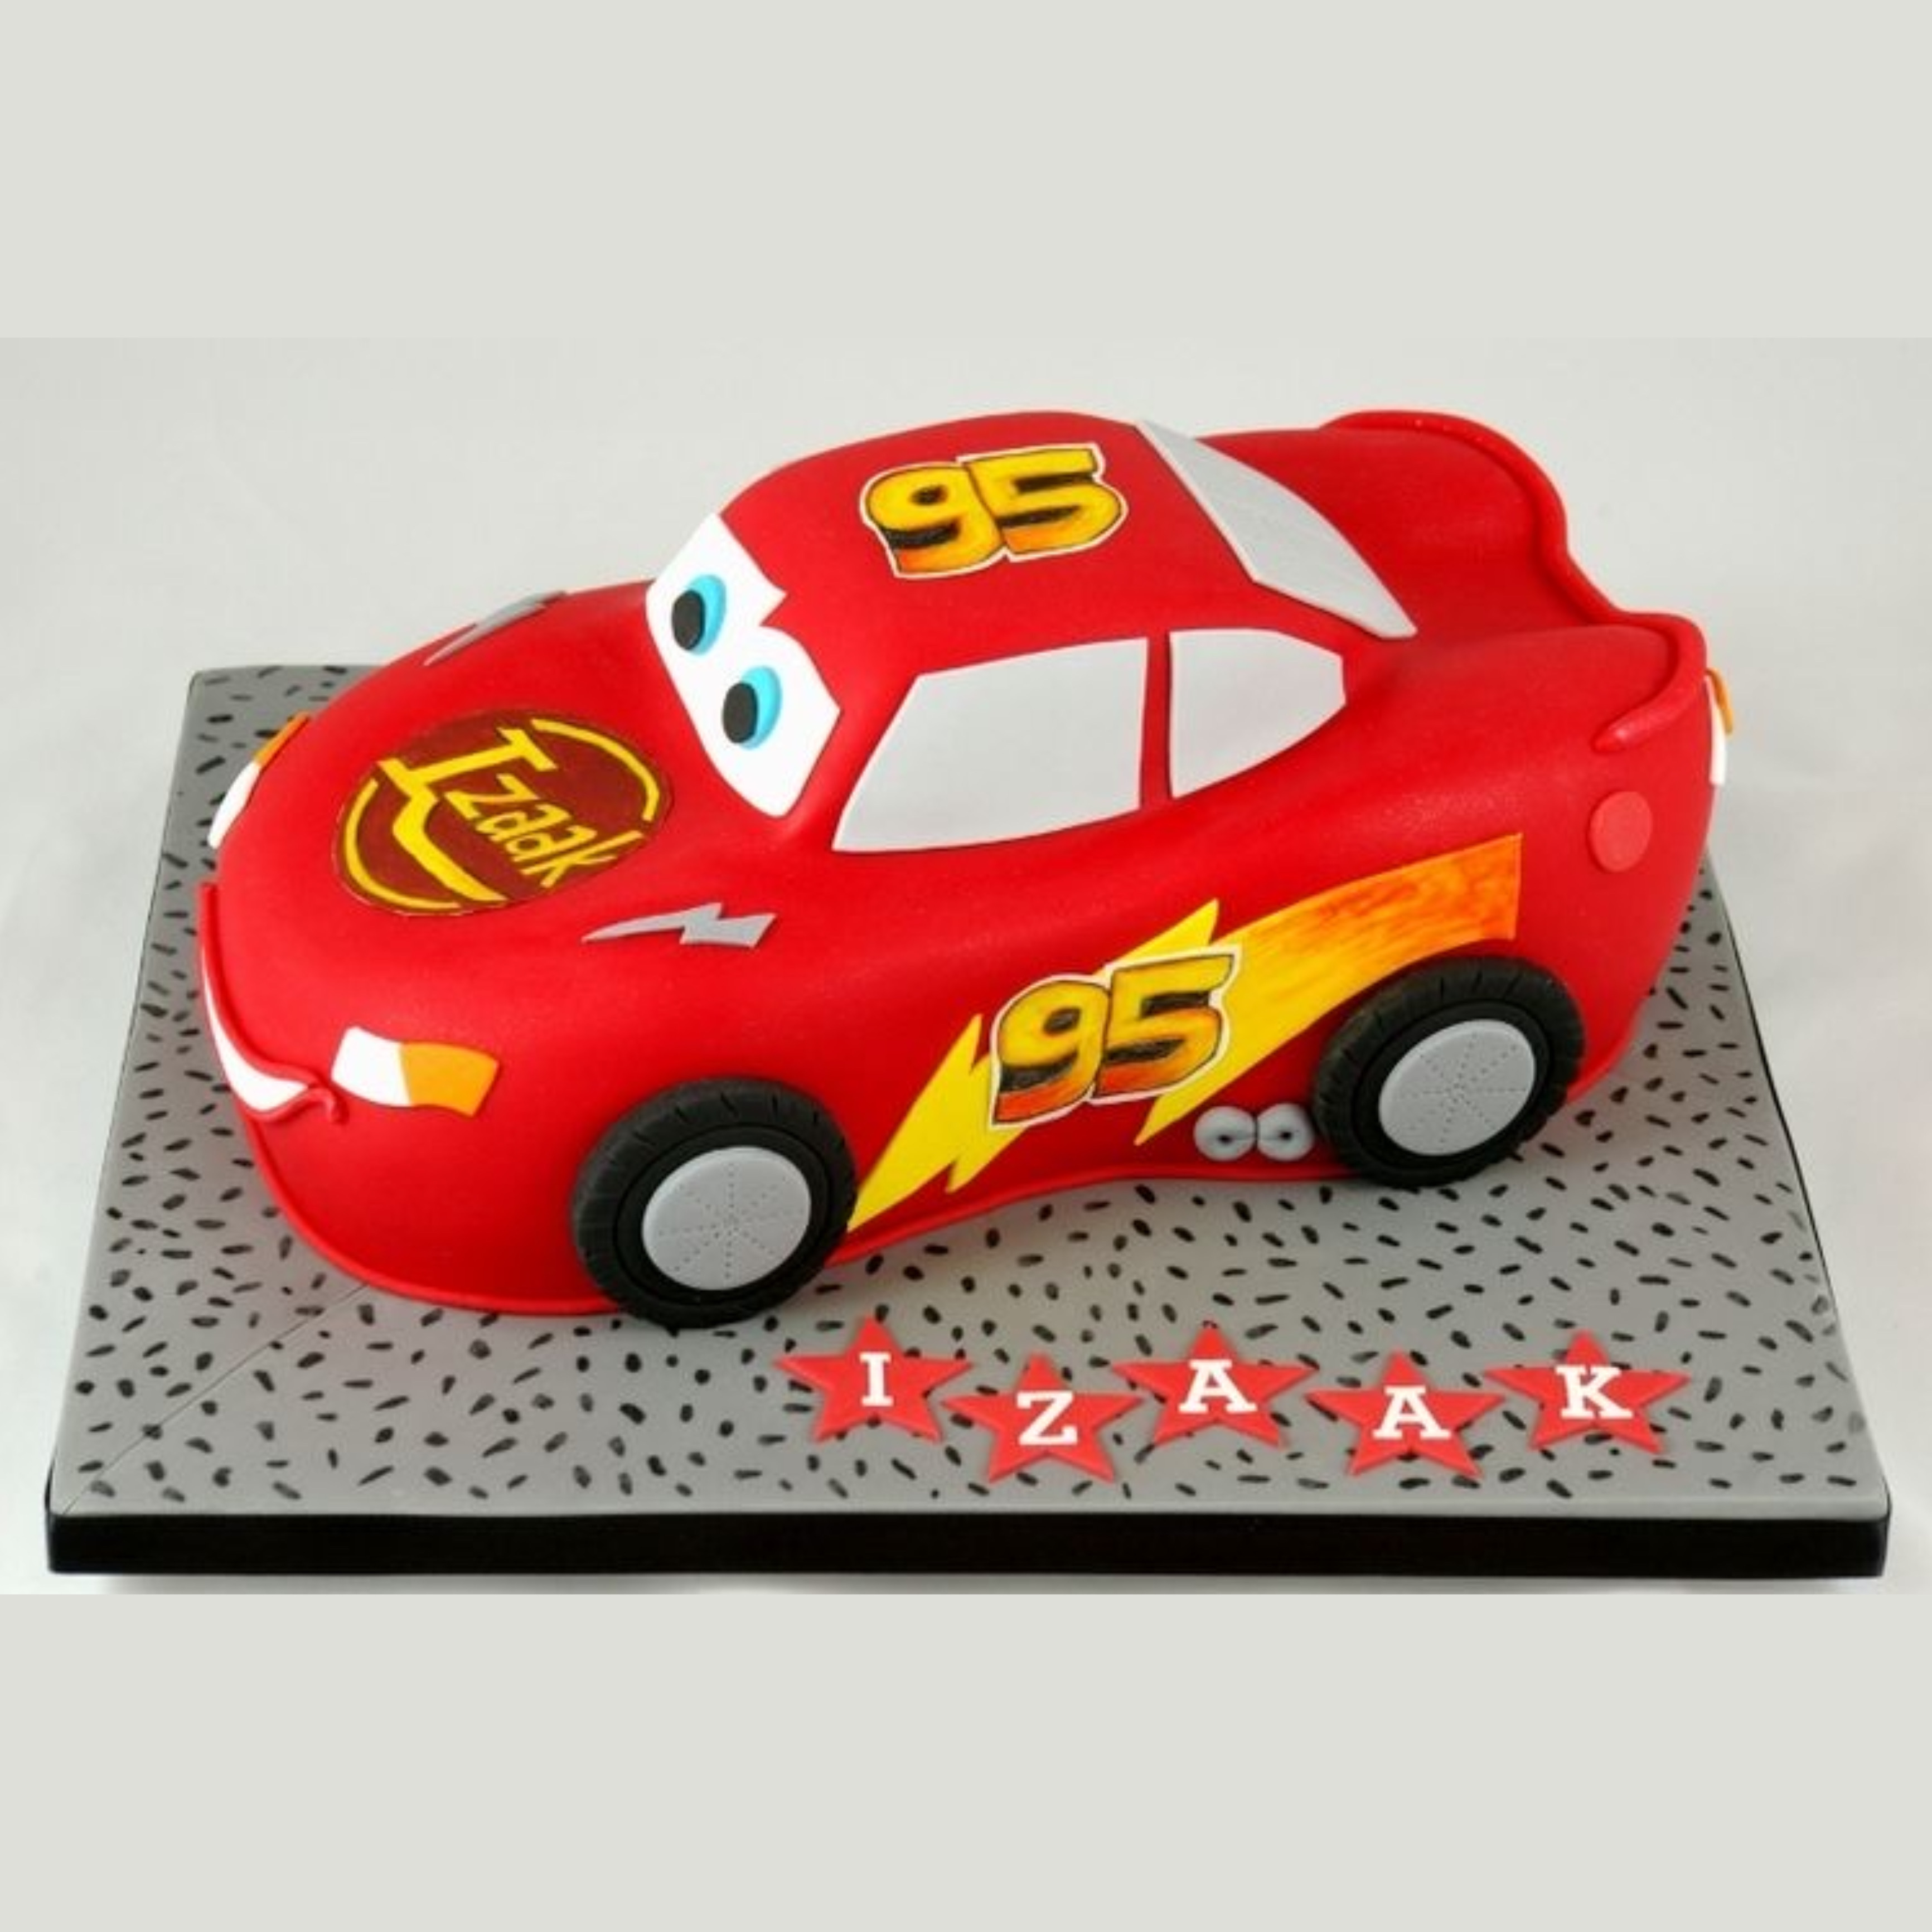 Big Car Cake by bakisto - the cake company in lahore